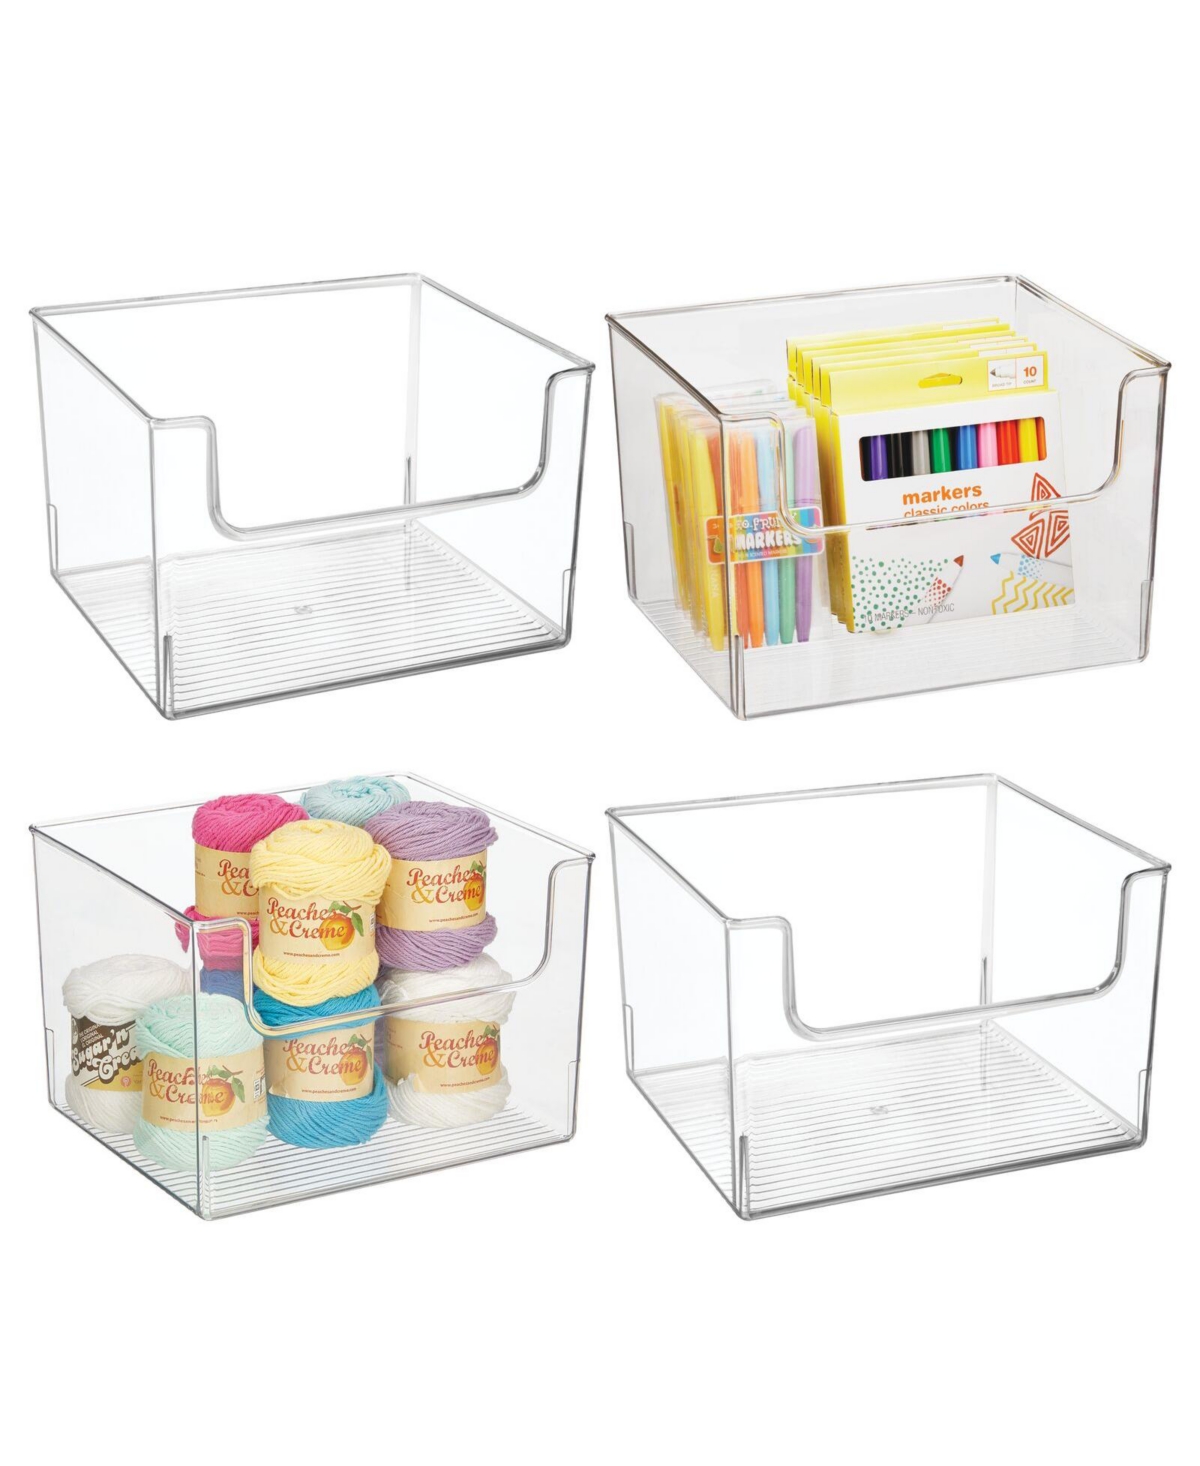 Crafting Plastic Storage Organizer Bin - Open Dip Front, 4 Pack, Clear - Clear